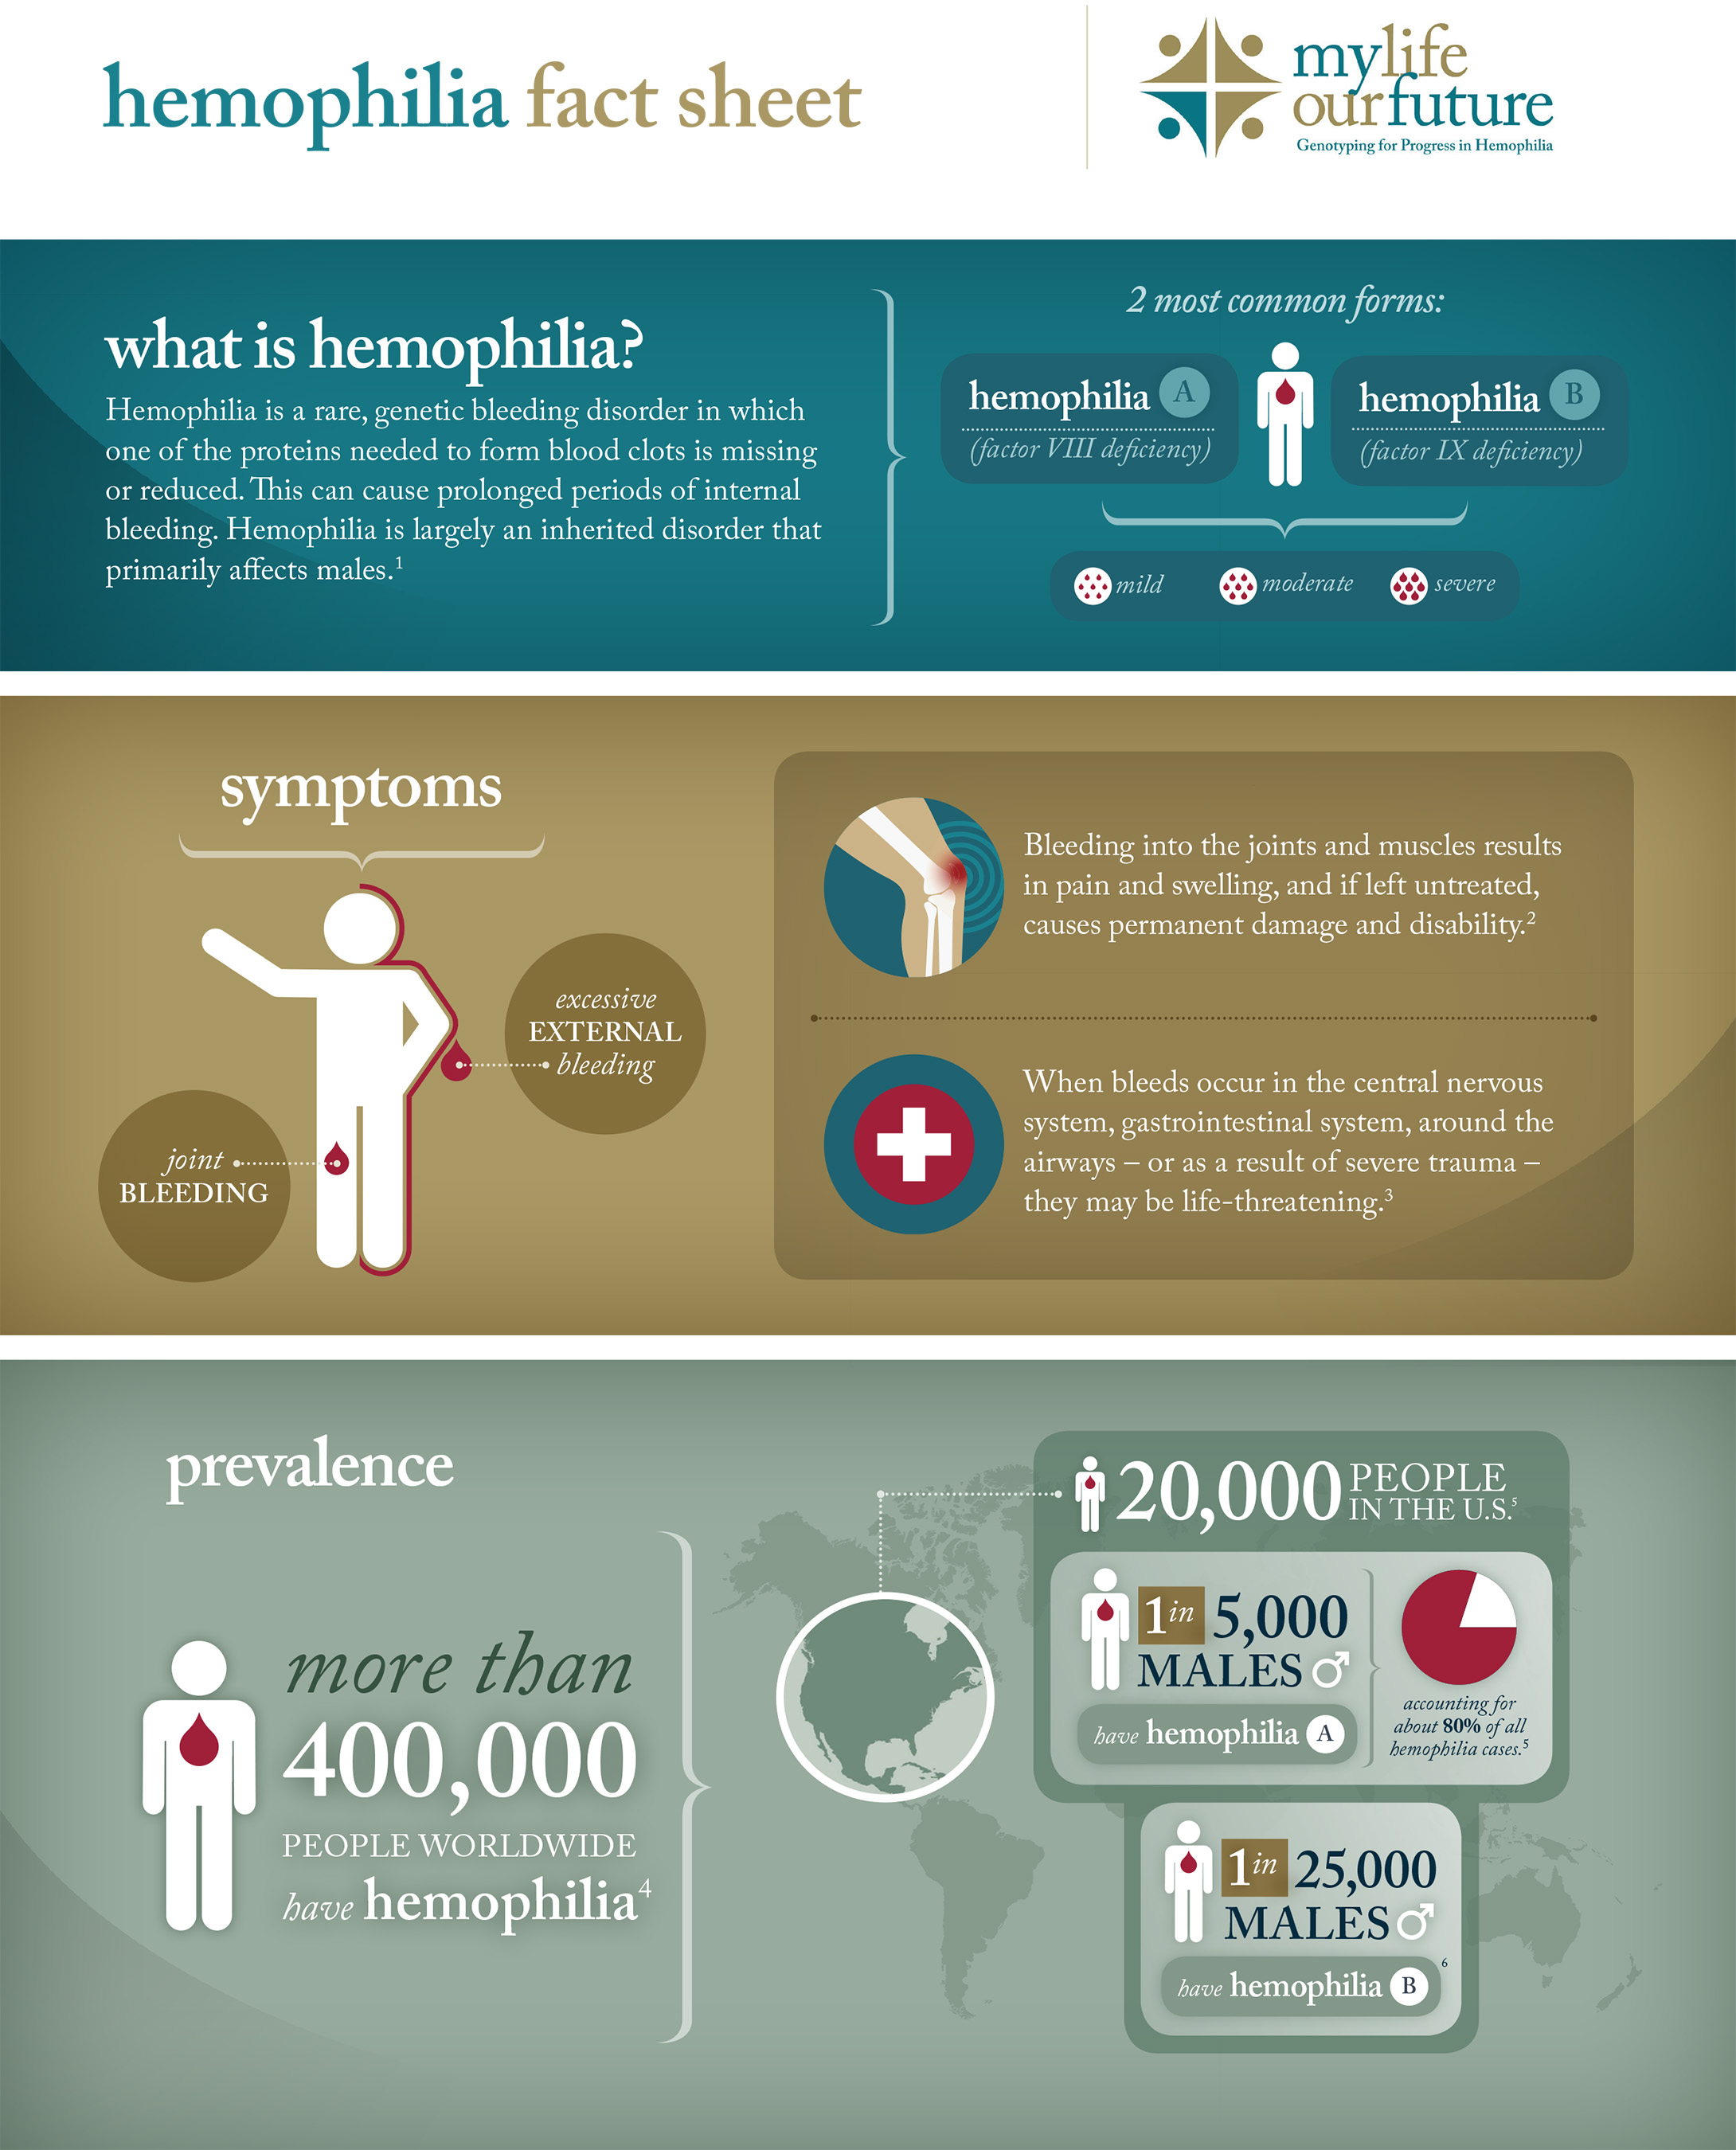 My Life, Our Future Opens World’s Largest Hemophilia Repository